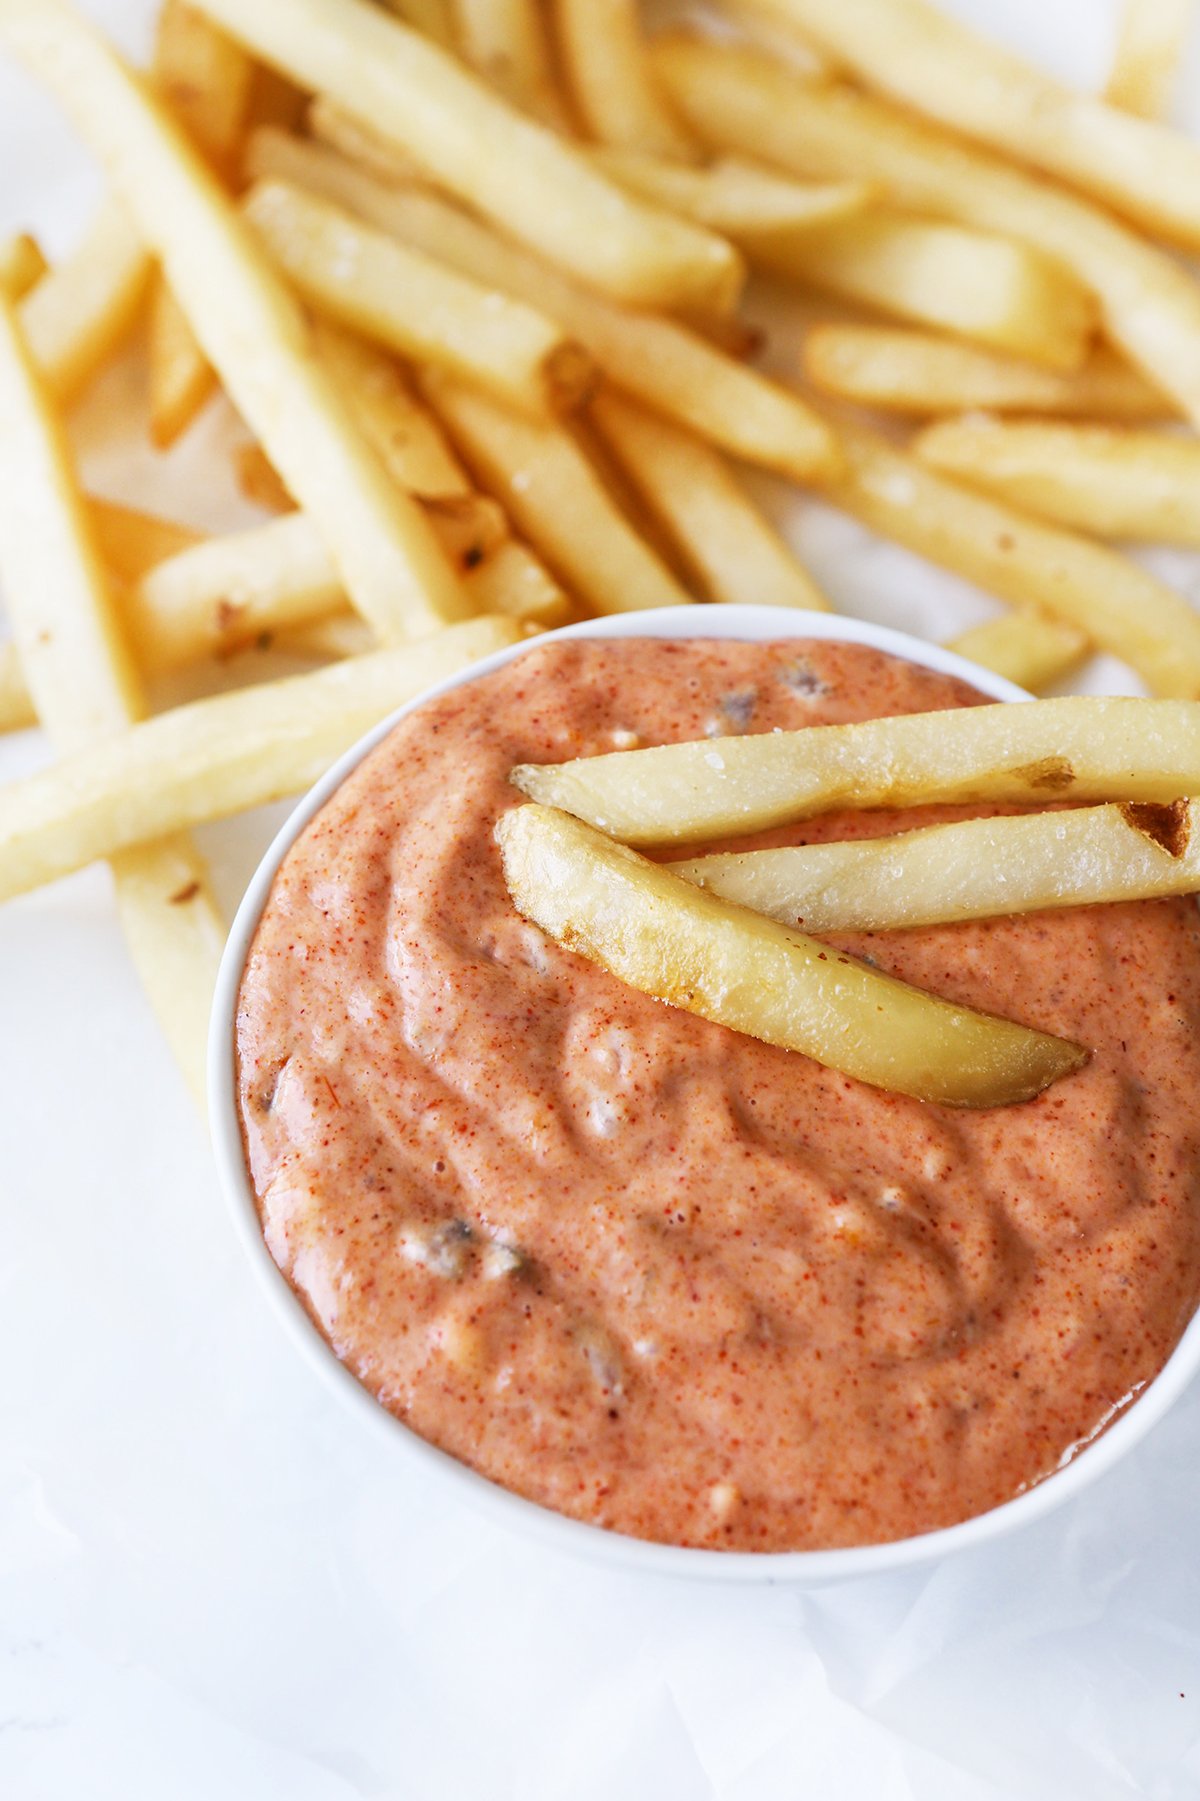 Bowl of crave sauce next to french fries.